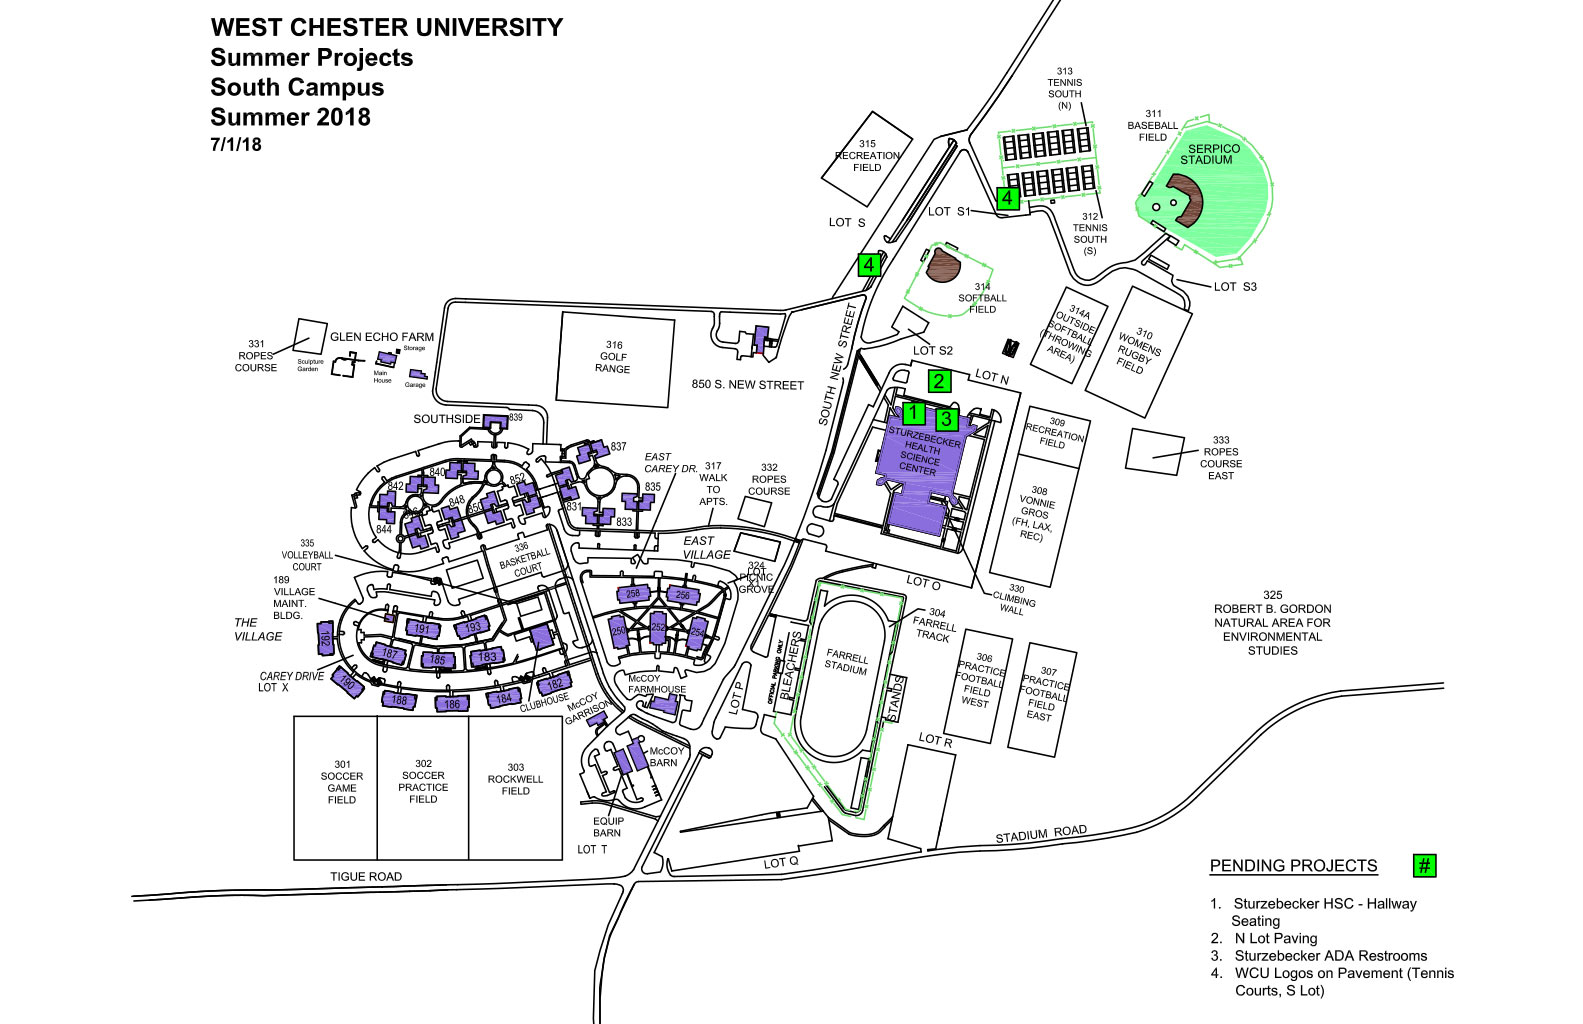 West chester university south campus map